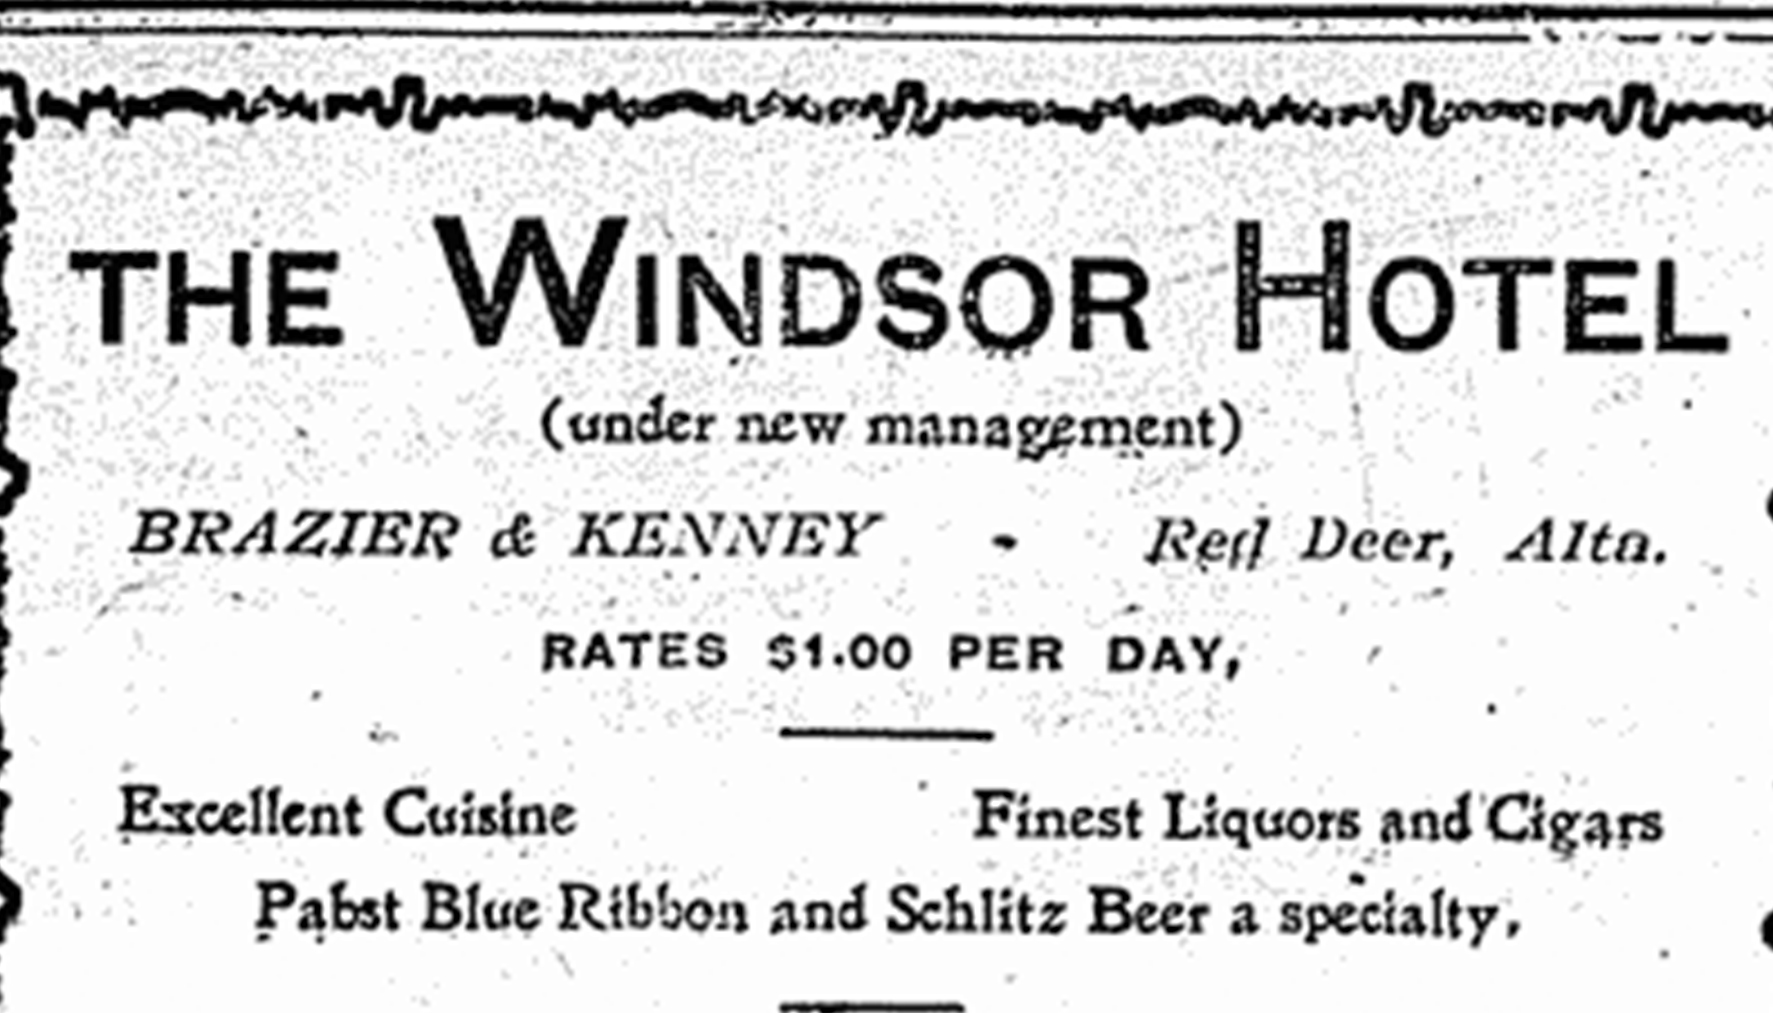 Advertisement for the Windsor Hotel in the Red Deer News, May 22, 1907